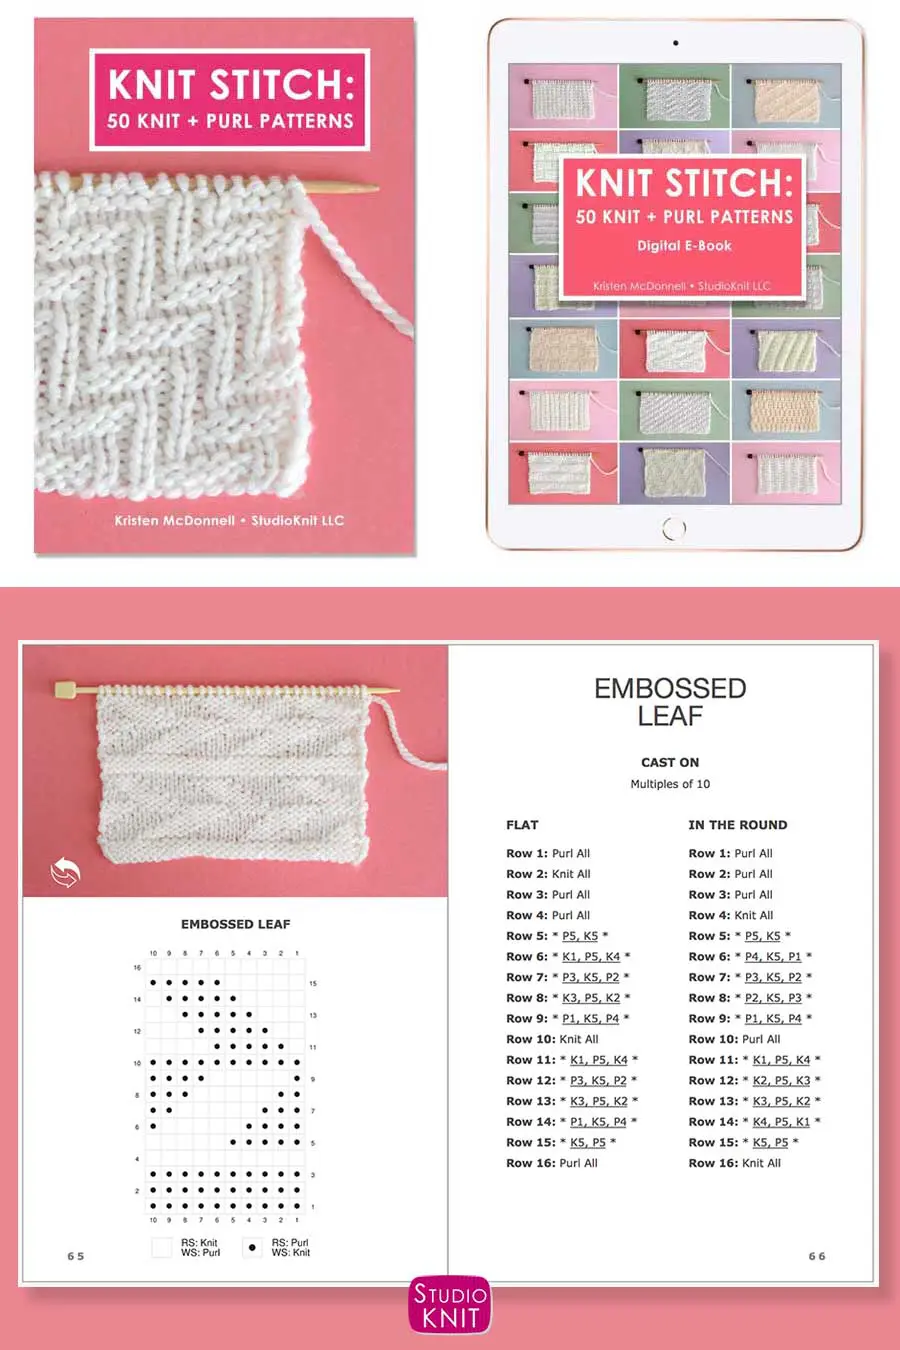 Inside Knit Stitch Pattern Book of Embossed Leaf knitted swatch page